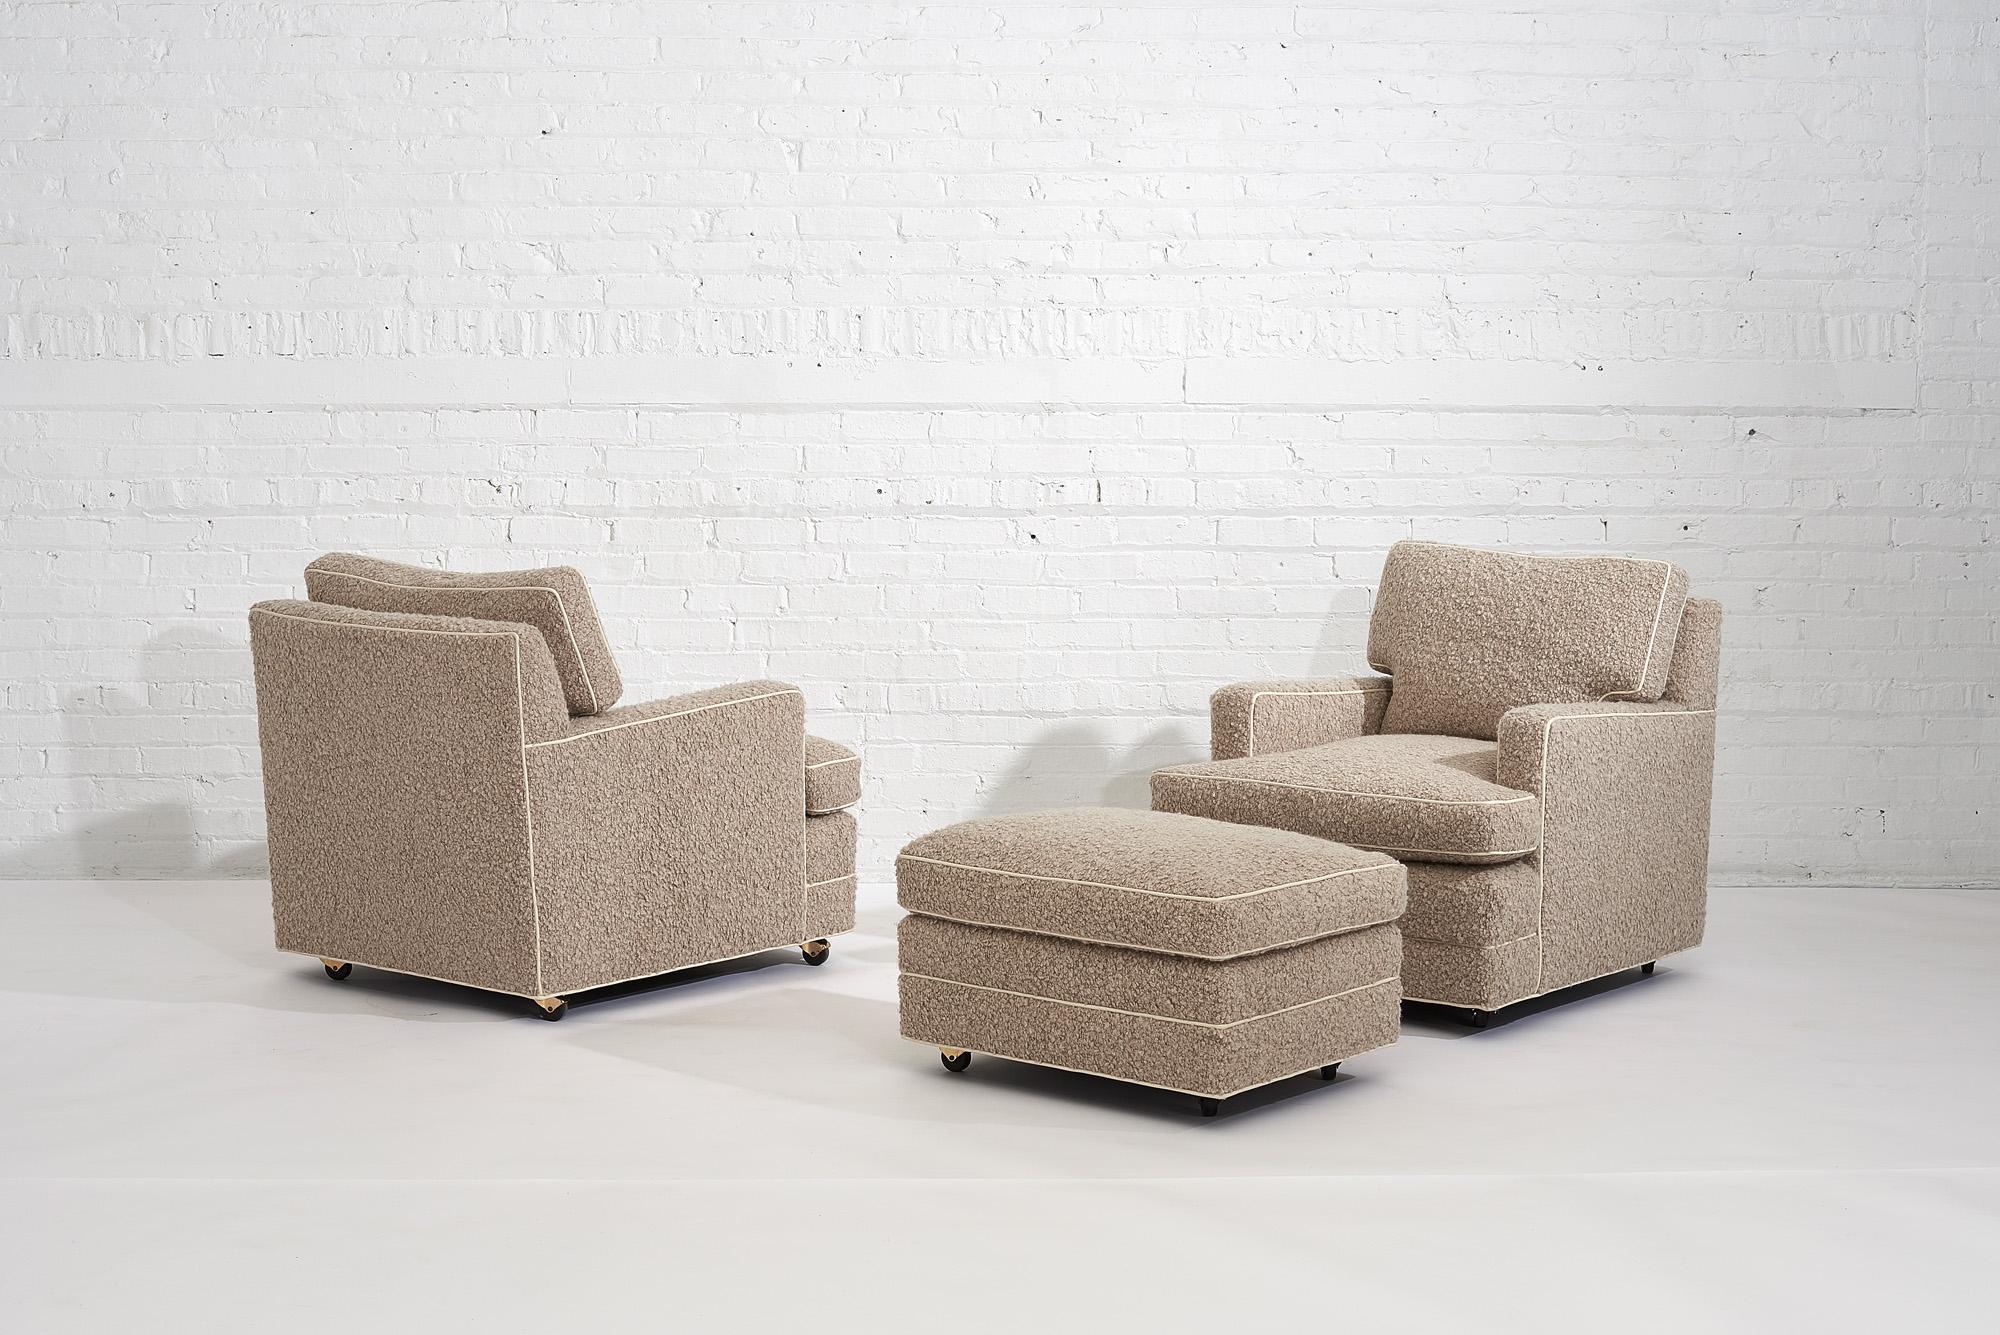 Dunbar lounge chairs with ottoman by Edward Wormely. Down filled chairs are upholstered in beige boucle white leather piping. Chairs are extremely comfortable.
Ottoman measures: 27.5” wide, 21” deep and 16” tall.